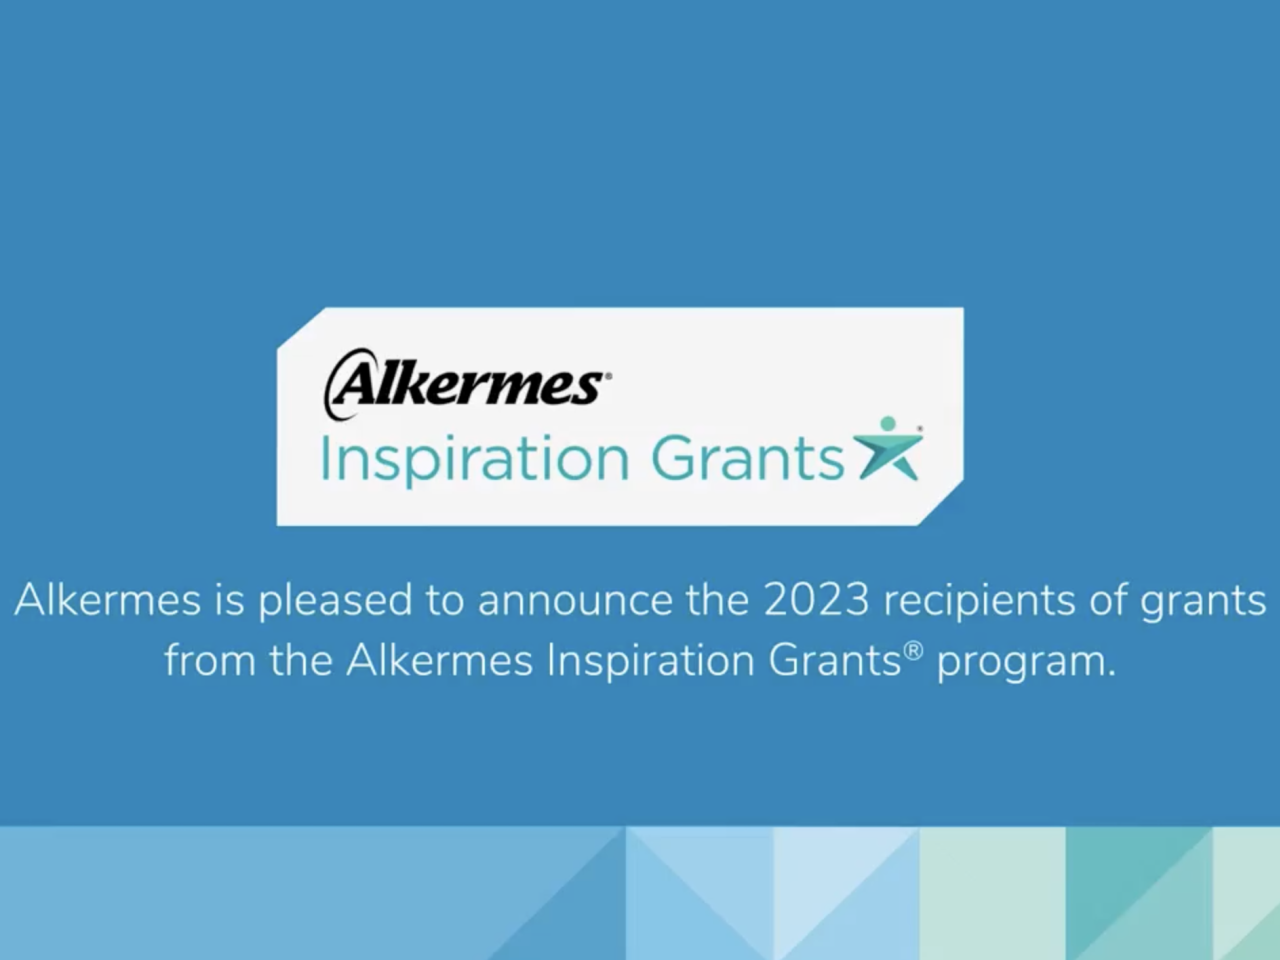 Alkermes is pleased to announce the 2023 recipients of grants from the Alkermes Inspiration Grants program